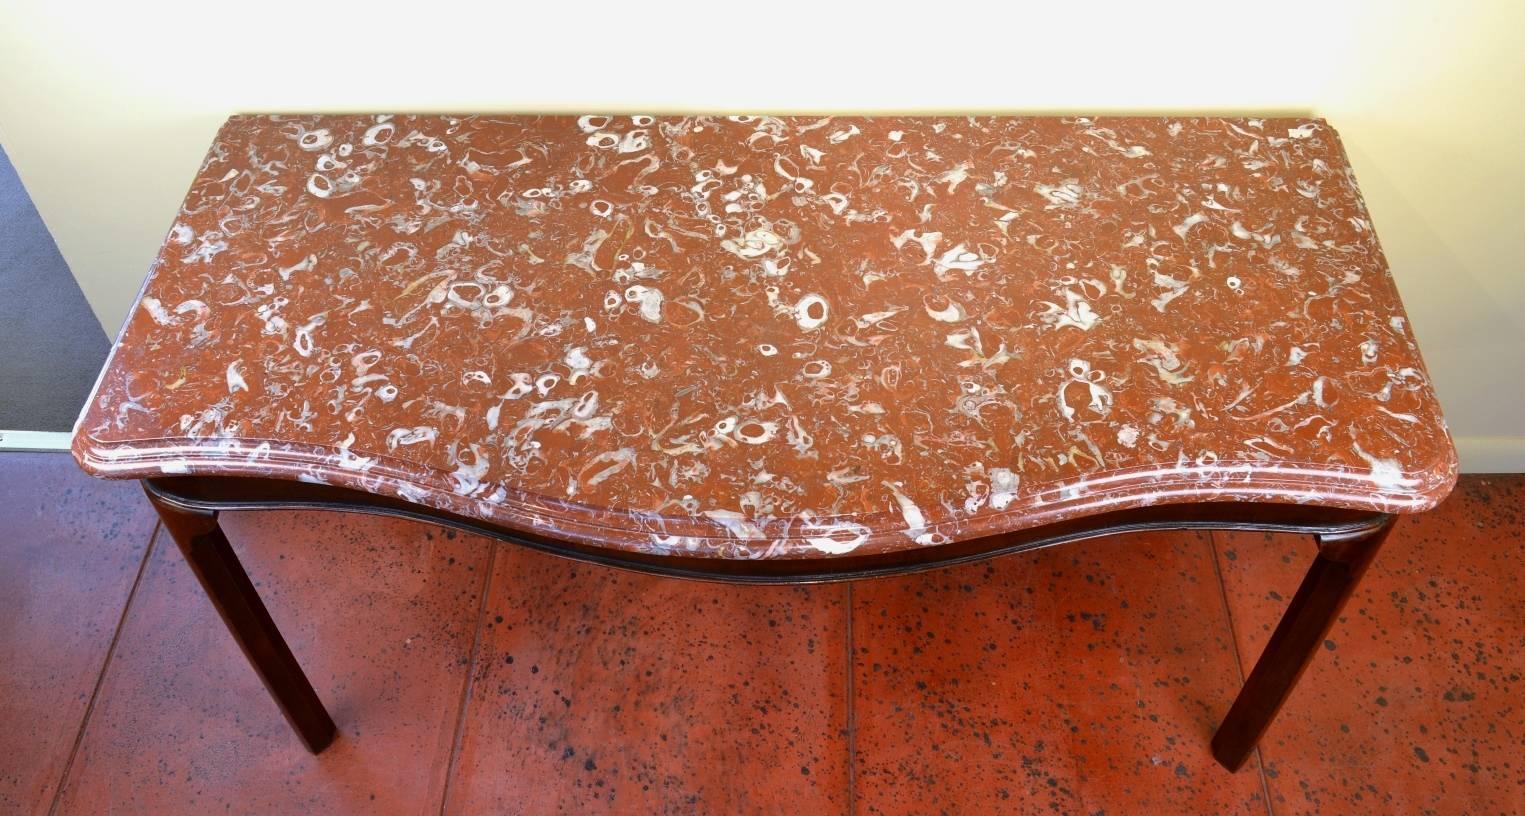 George III mahogany serpentine serving table, the red marble top (Bilbao Conchiferous) over the beaded apron supported by four square legs, each with a rounded face and ogee brackets. (Marble replaced).